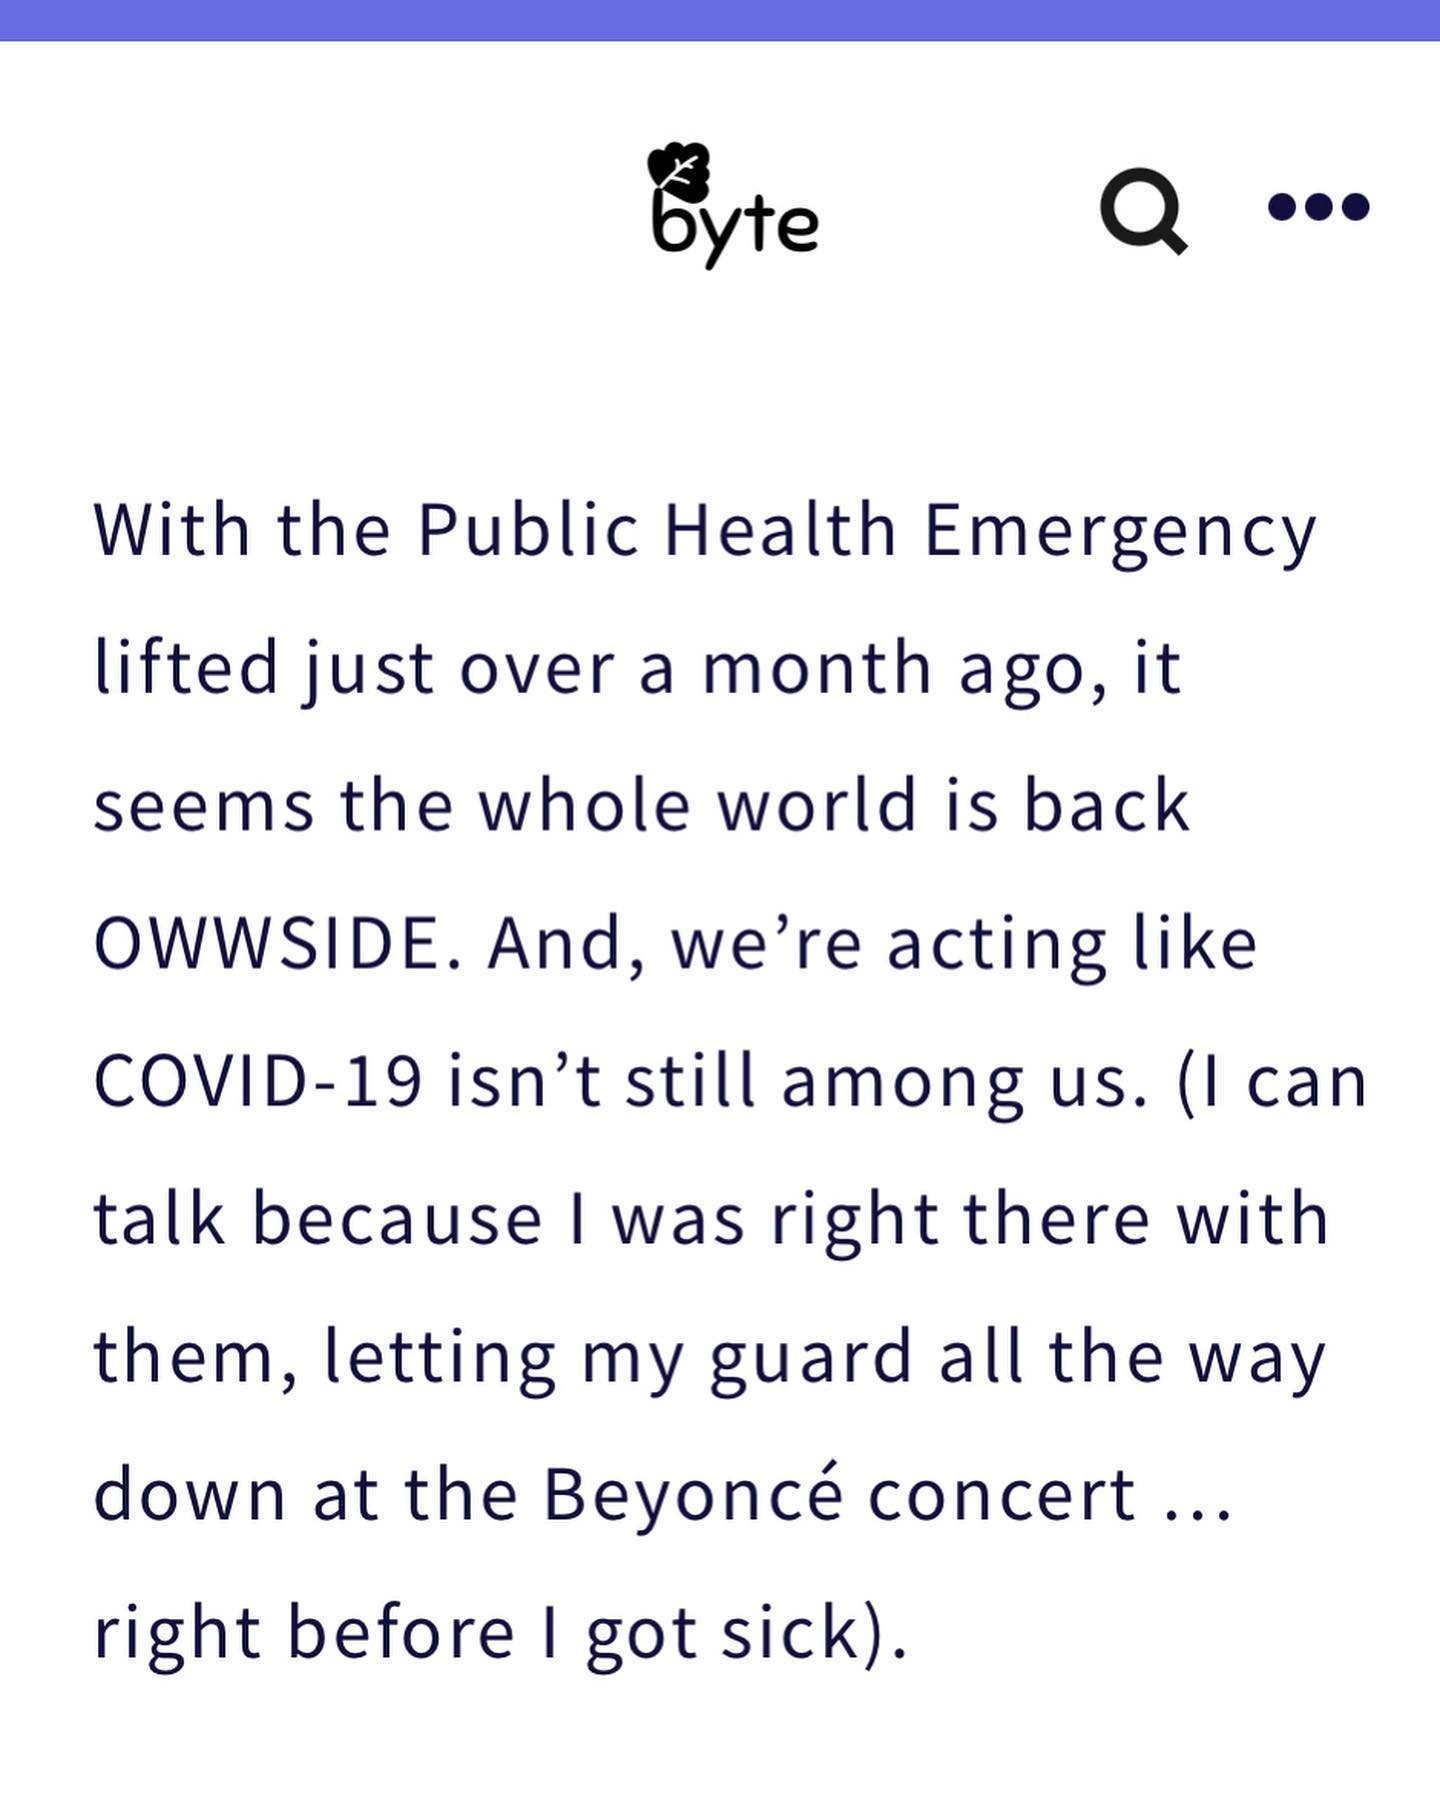 The &lsquo;Vid still thinks it&rsquo;s a movie!

Last COVID-19 is having a late-summer surge with hospitalizations up 10%, according to the CDC. Don&rsquo;t forget your mask 😷! Even Beyonc&eacute; says so! (swipe)

#selfloveletter #maskup even at #r